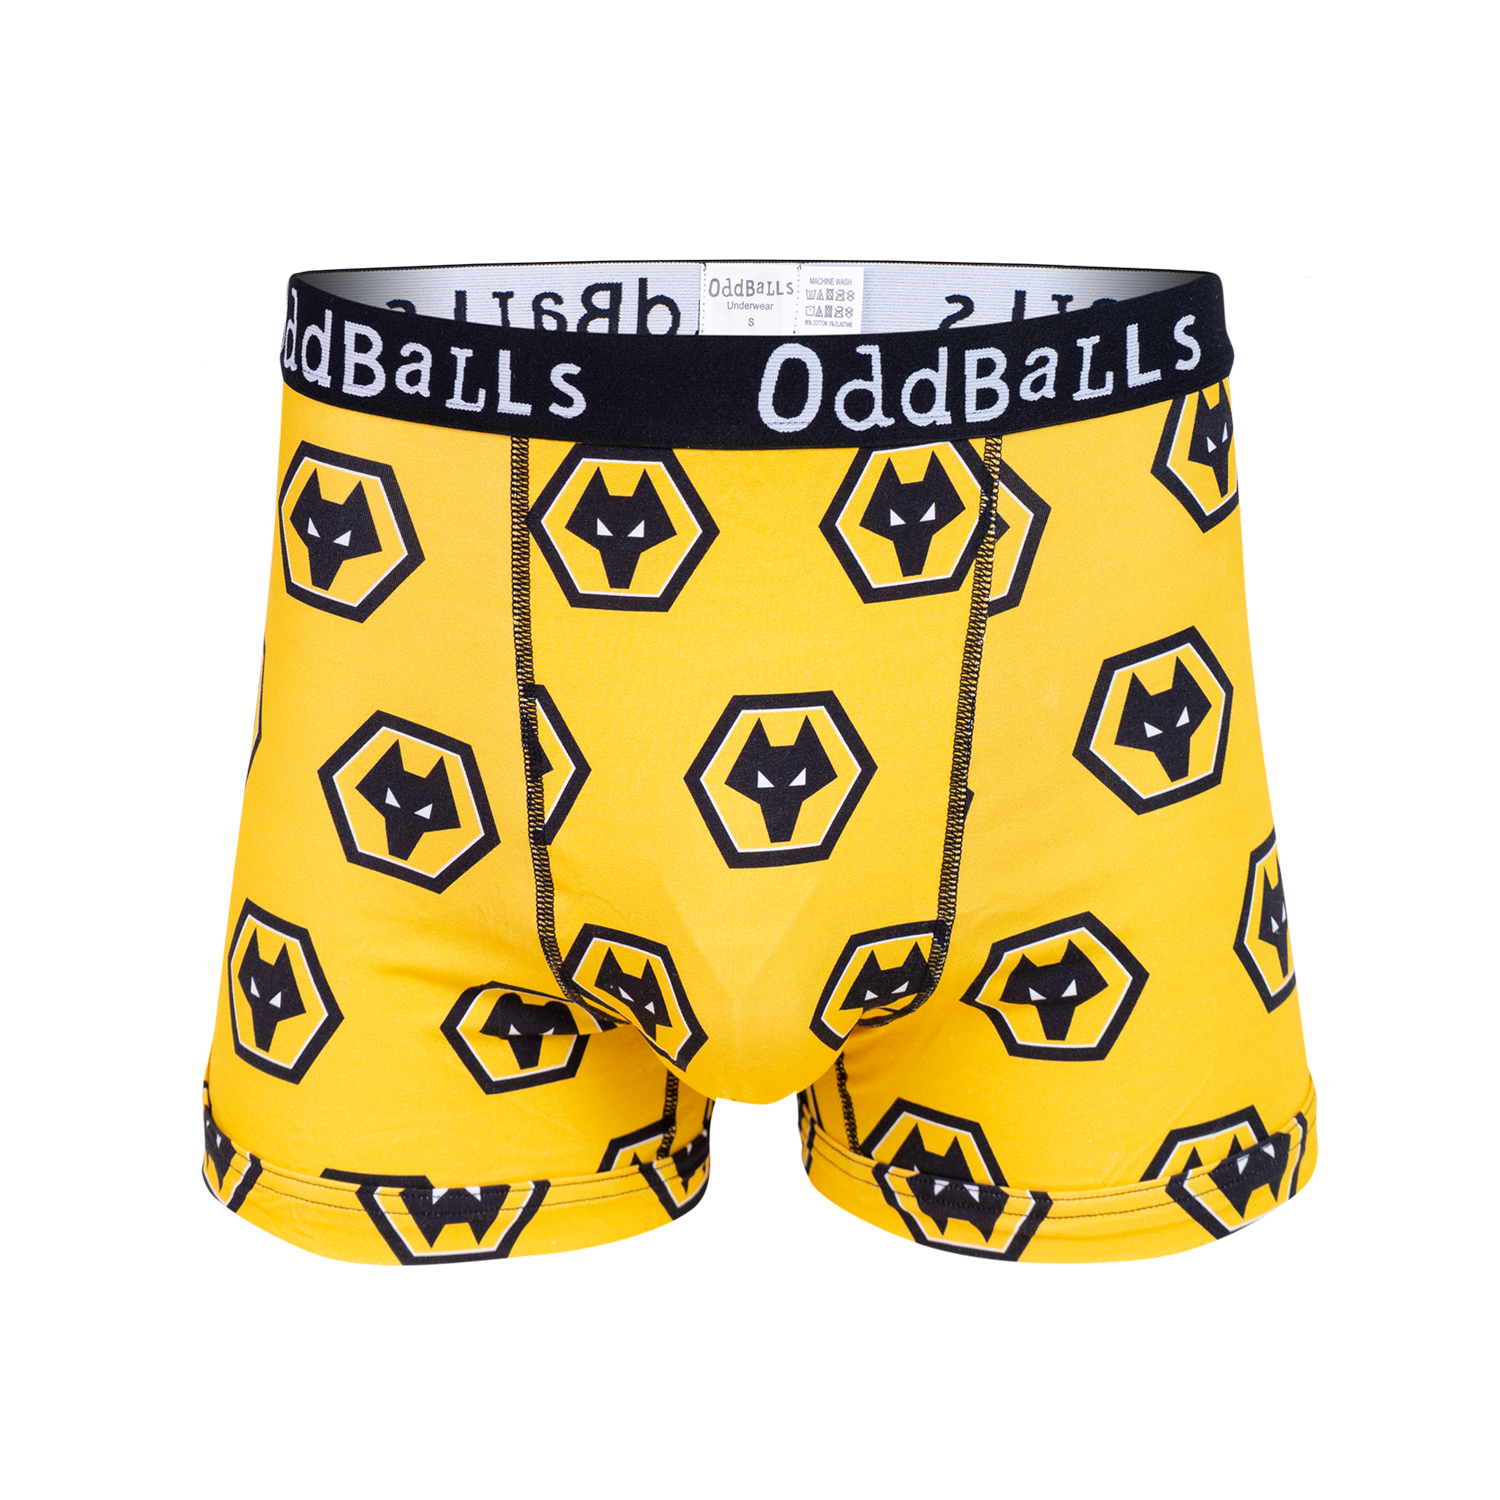 OddBalls on X: Boxers or Briefs? @ThomEvans11 or @maxevans13? Who